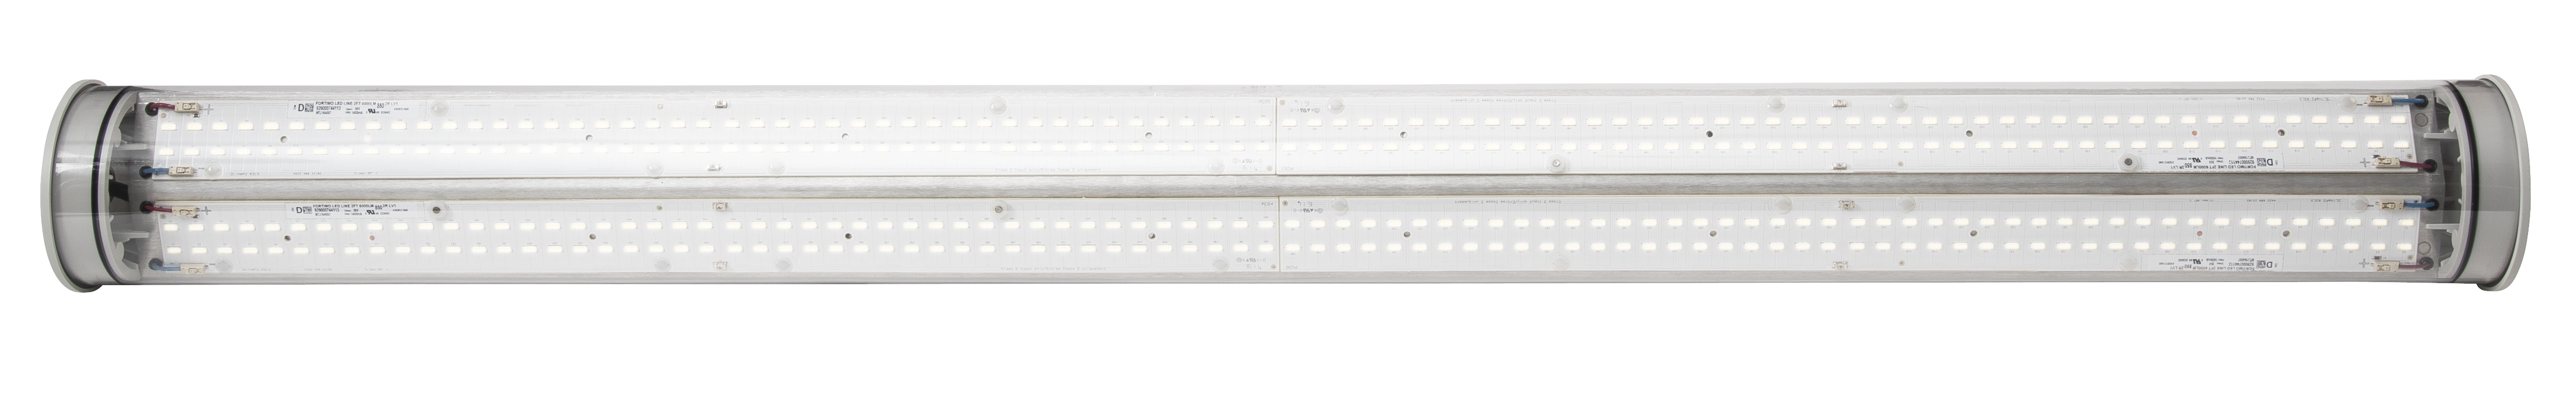 WaterGuard LED High Output Waterproof Industrial Light Fixtures